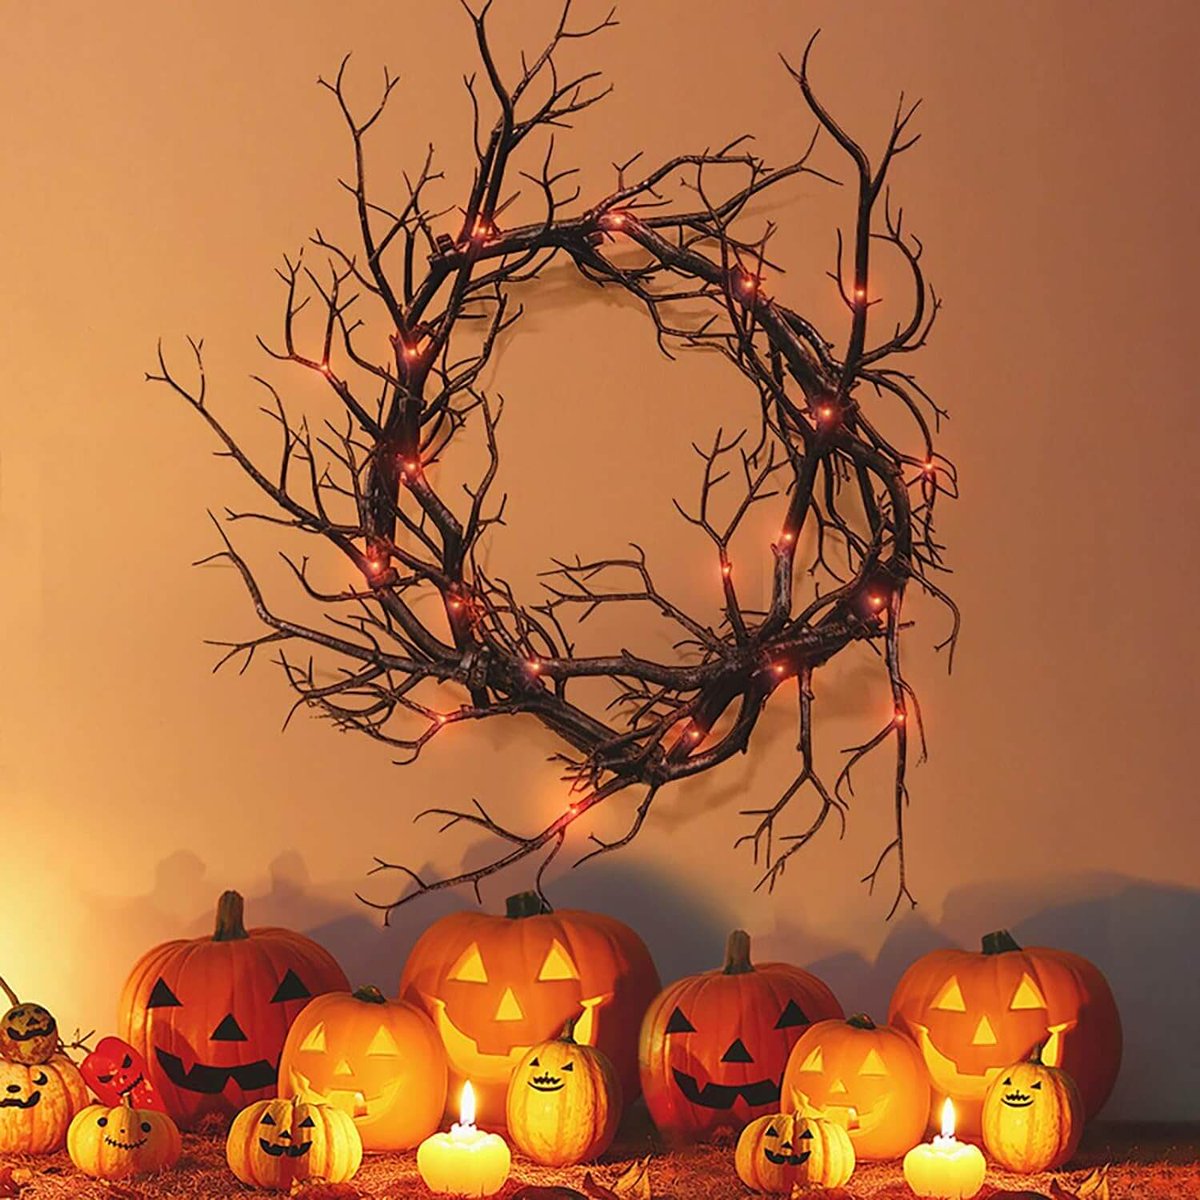 #Halloween is mix of fun and fright. #Halloween has become a time for people of all ages. As the air turns crisp and the leaves rustle... Tomorrow is Halloween Happy Halloween Eve Victory Monday Good Monday sevenedges.com/halloween-deco… #MondayMotivation #Mondayvibes #MondayMood